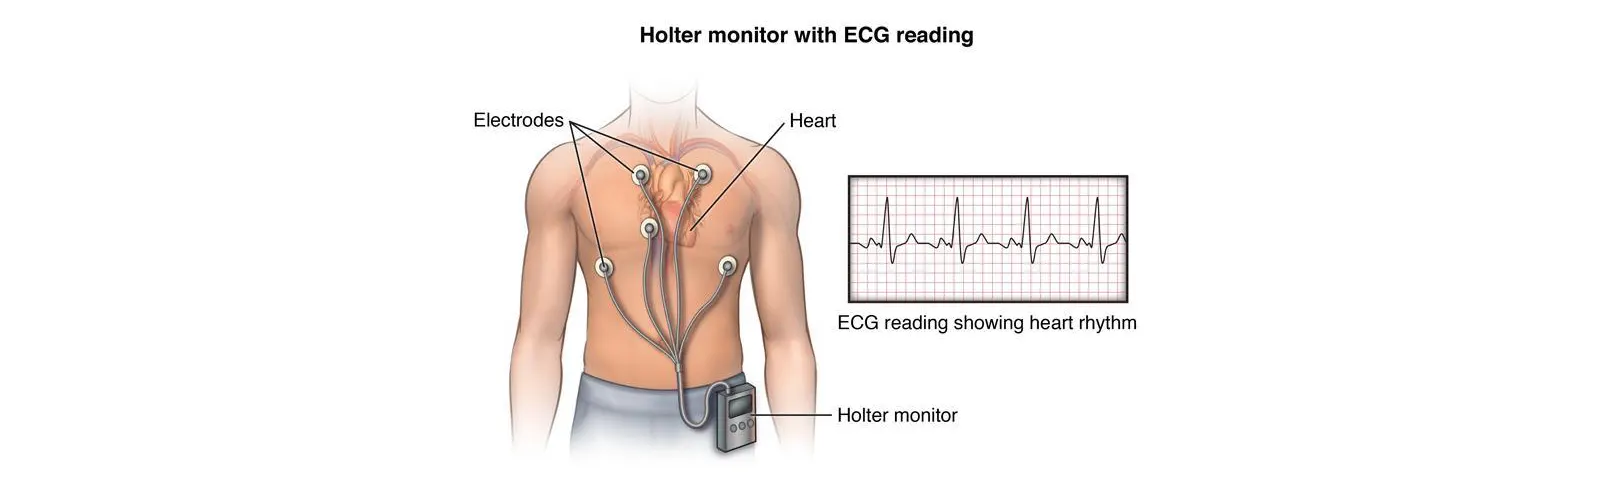 Diagnostic and Imaging Centre with Holter Monitoring Facility